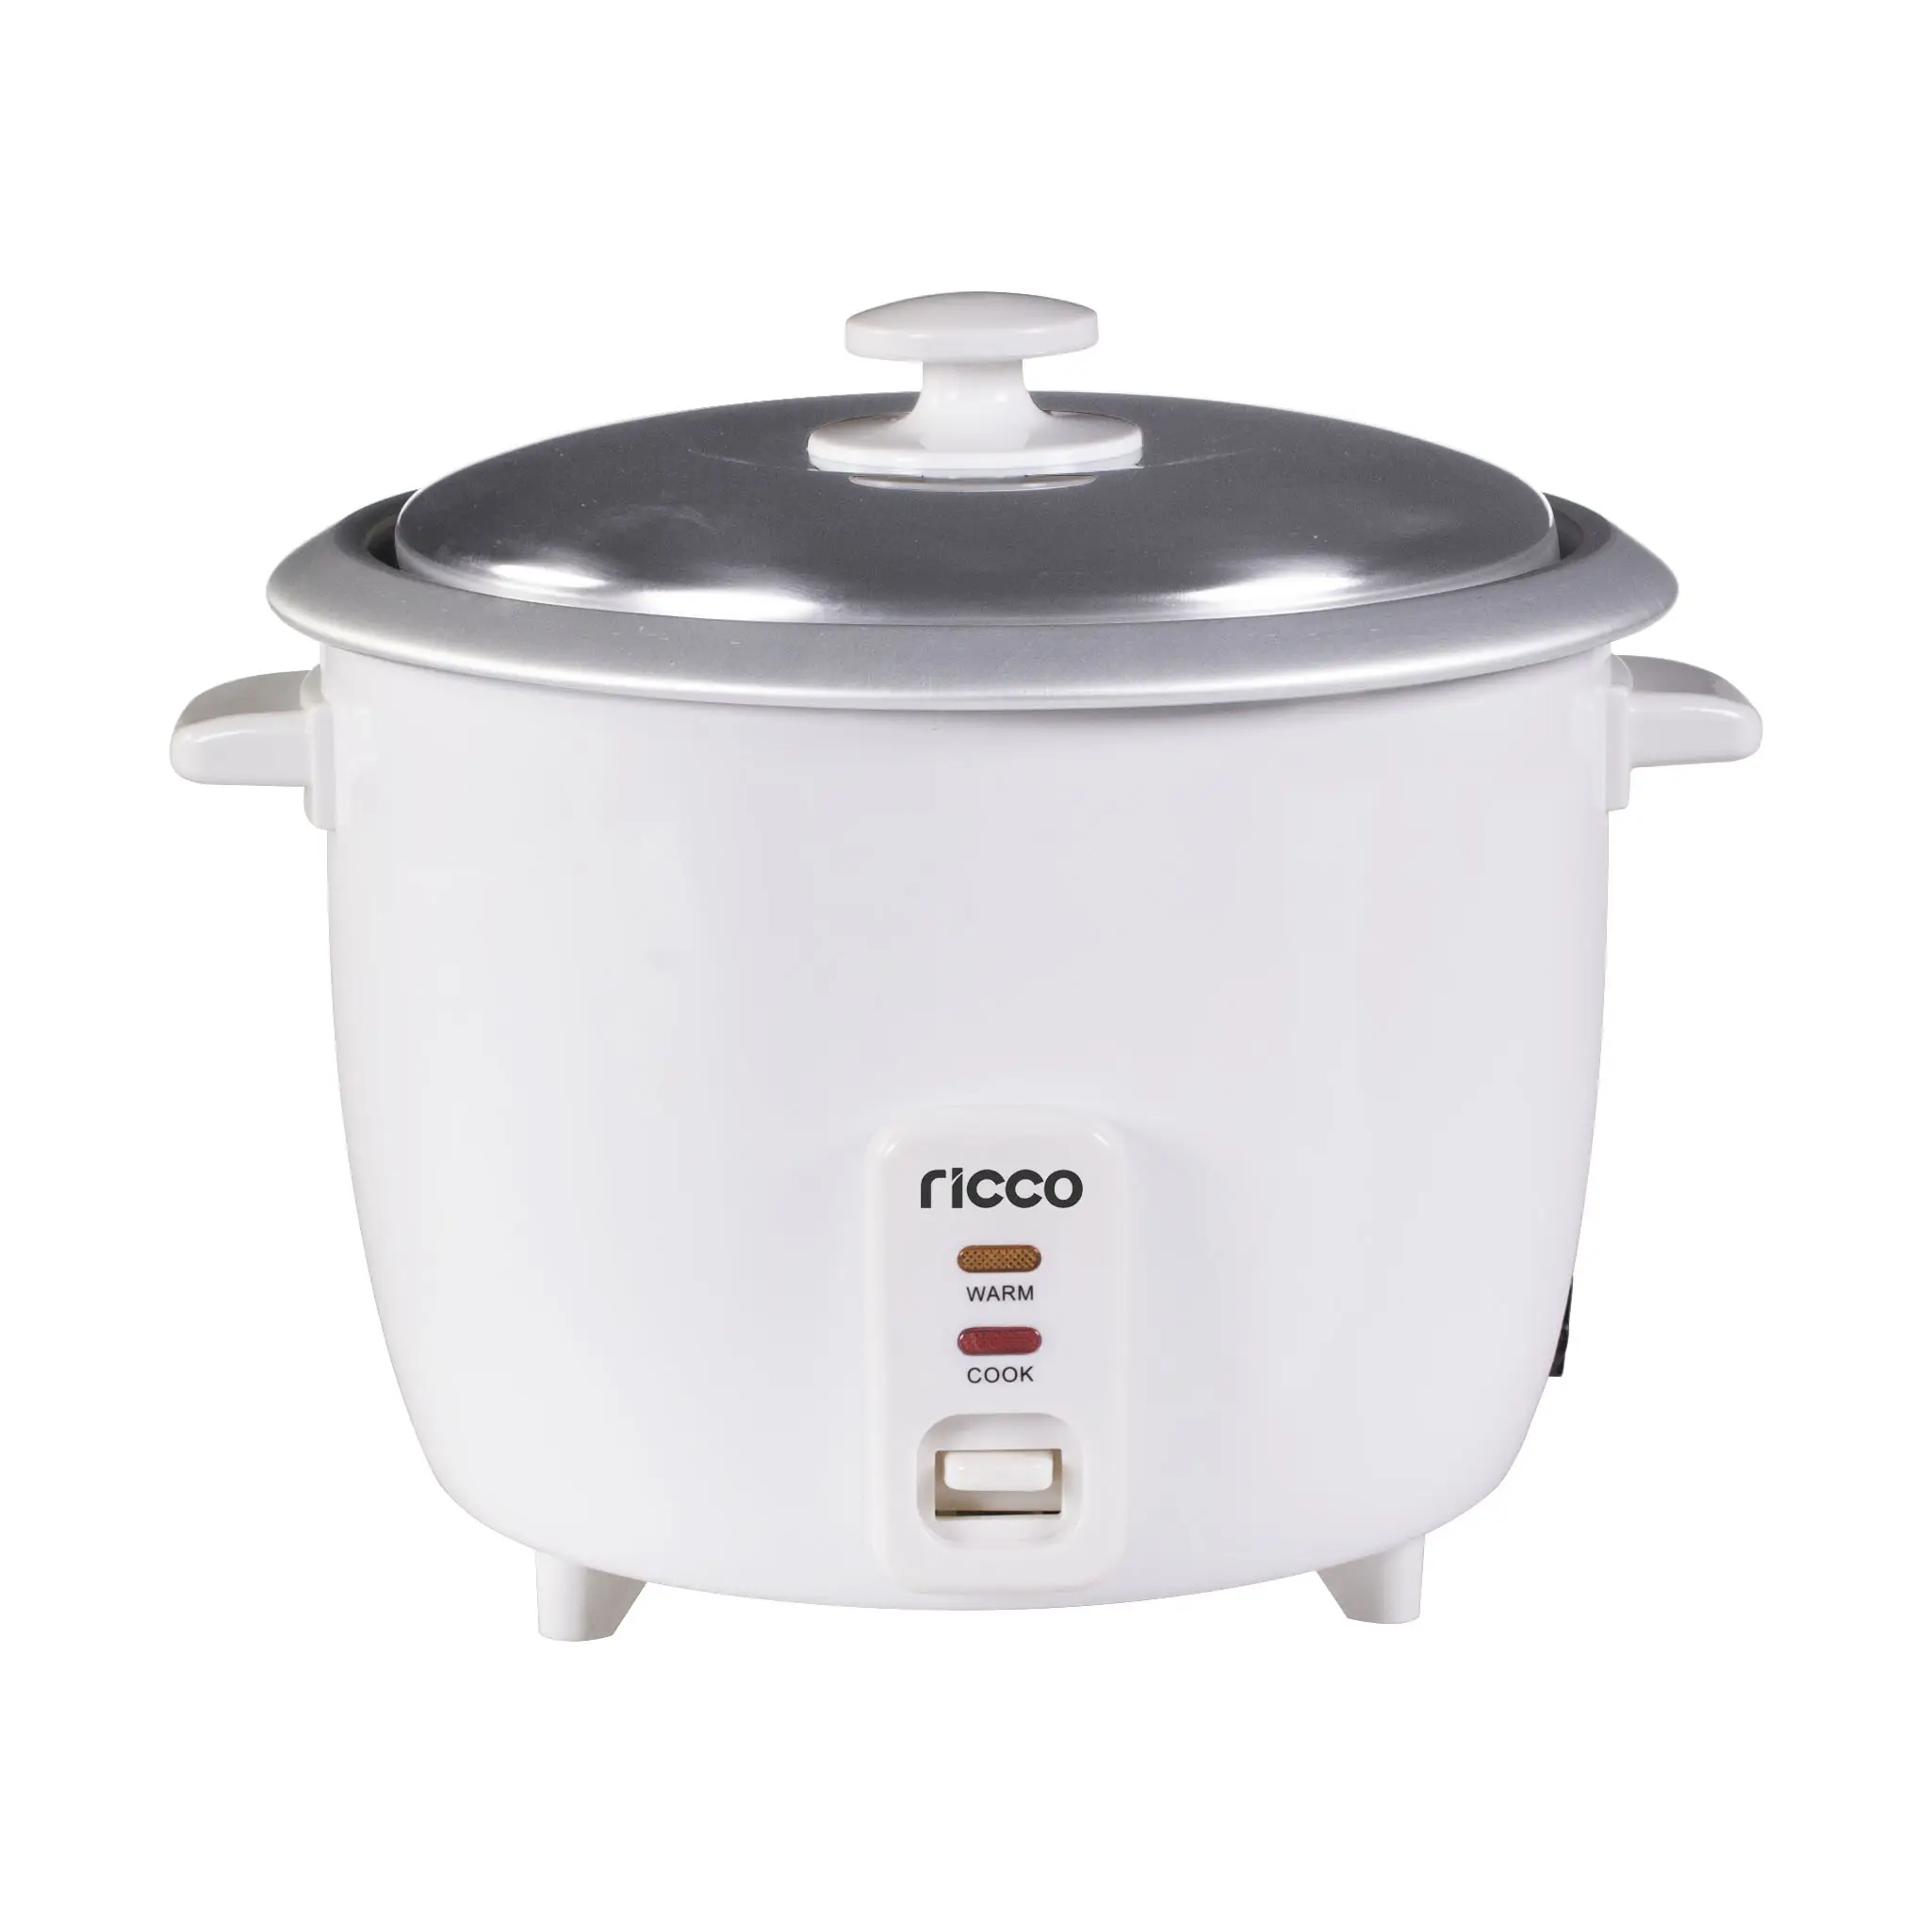 cheaper drum rice cooker with aluminum inner pot with stainless steel lid